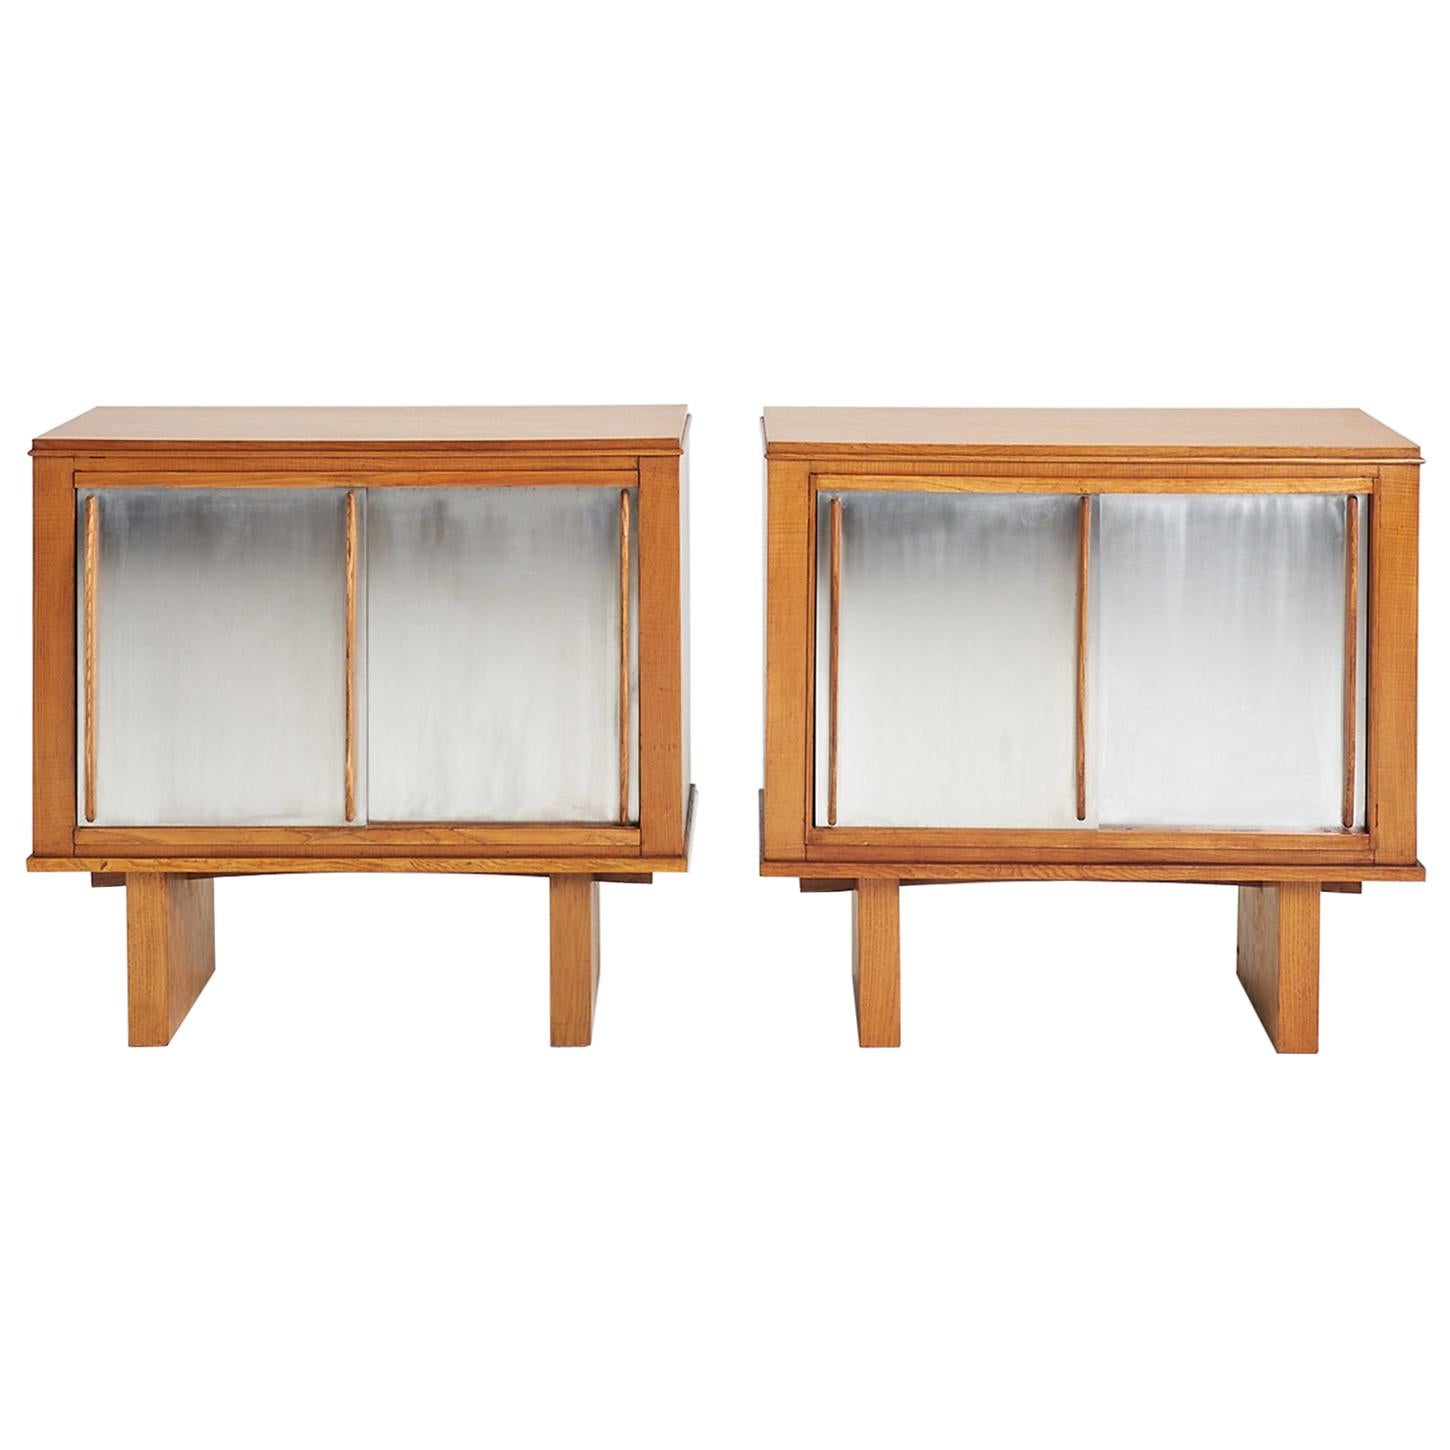 Pair of Oak and Aluminium Cabinets, in the Manner of Charlotte Perriand